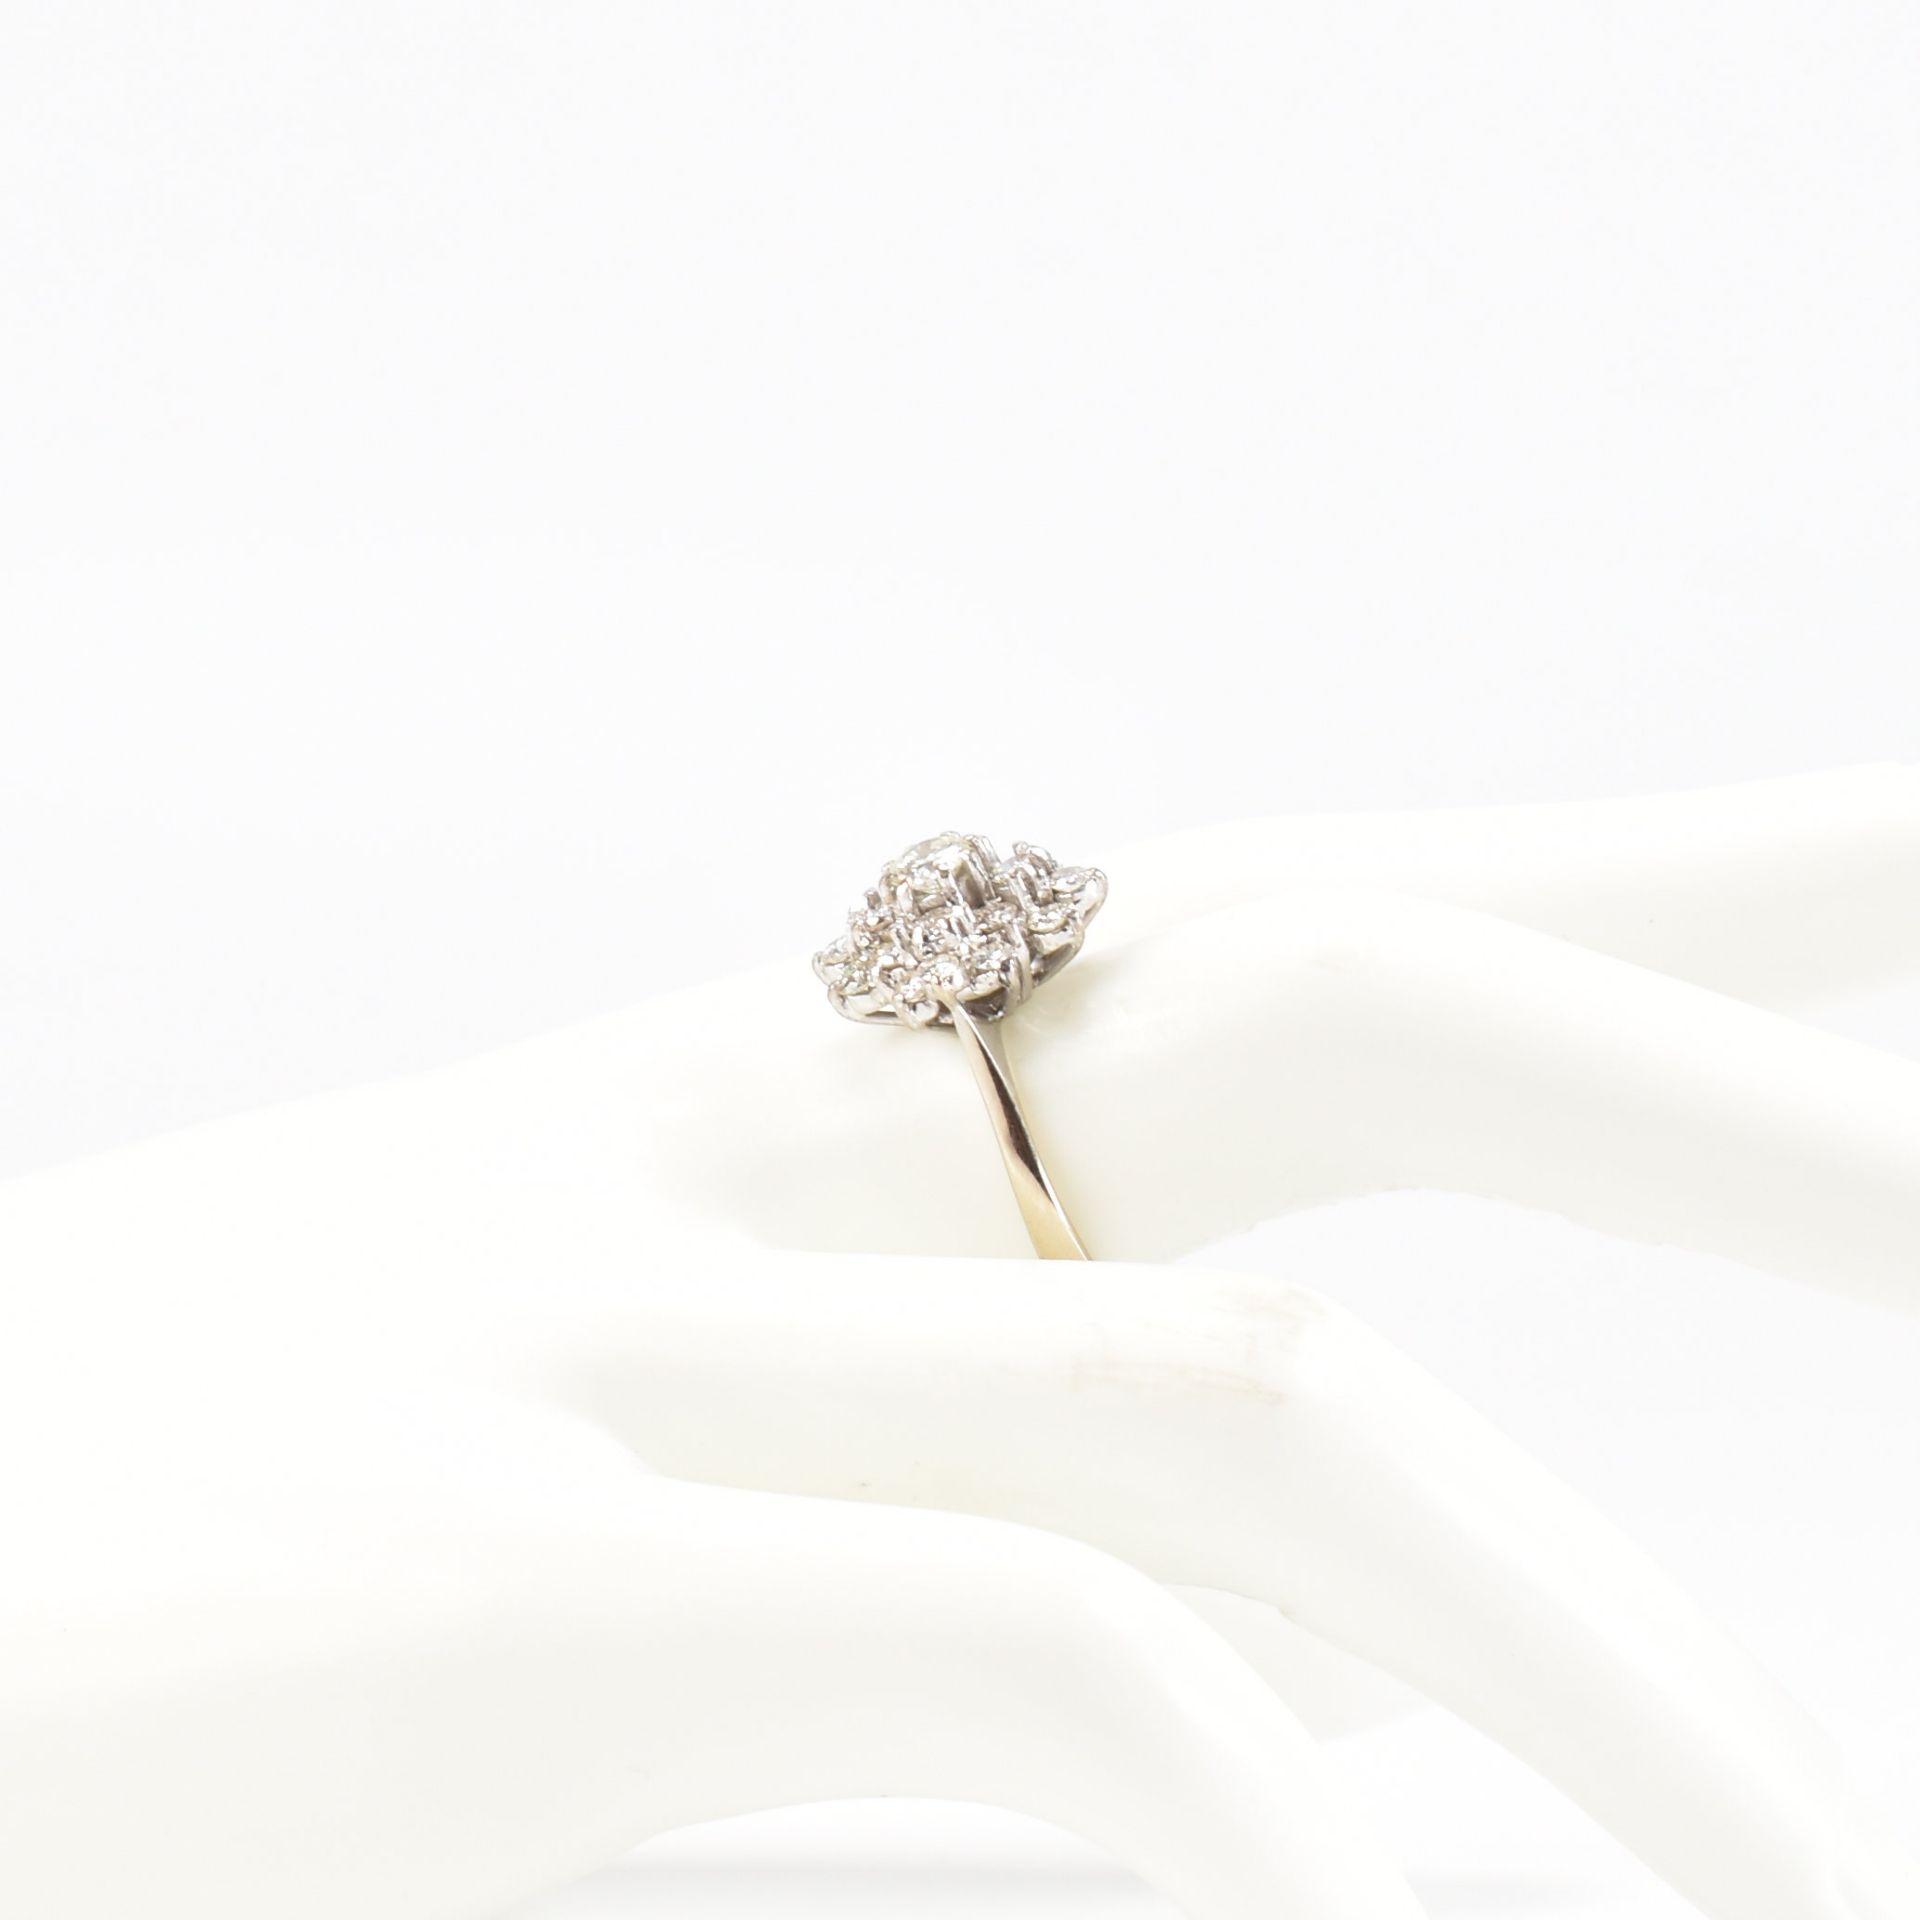 HALLMARKED 18CT GOLD & DIAMOND CLUSTER RING - Image 9 of 9